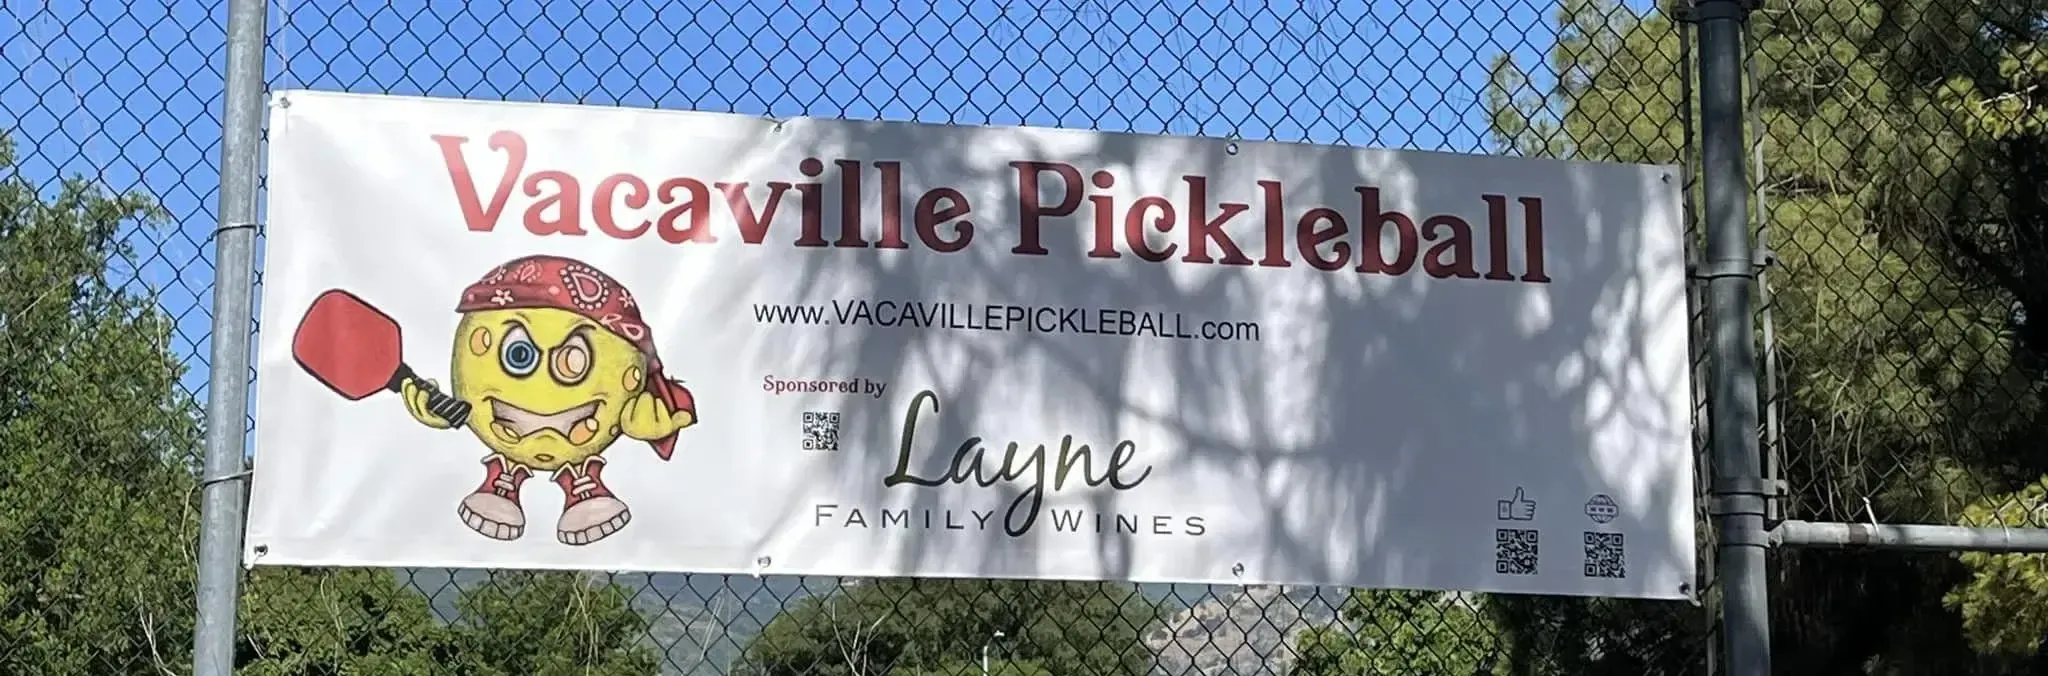 Vacaville Pickle Ball Banner